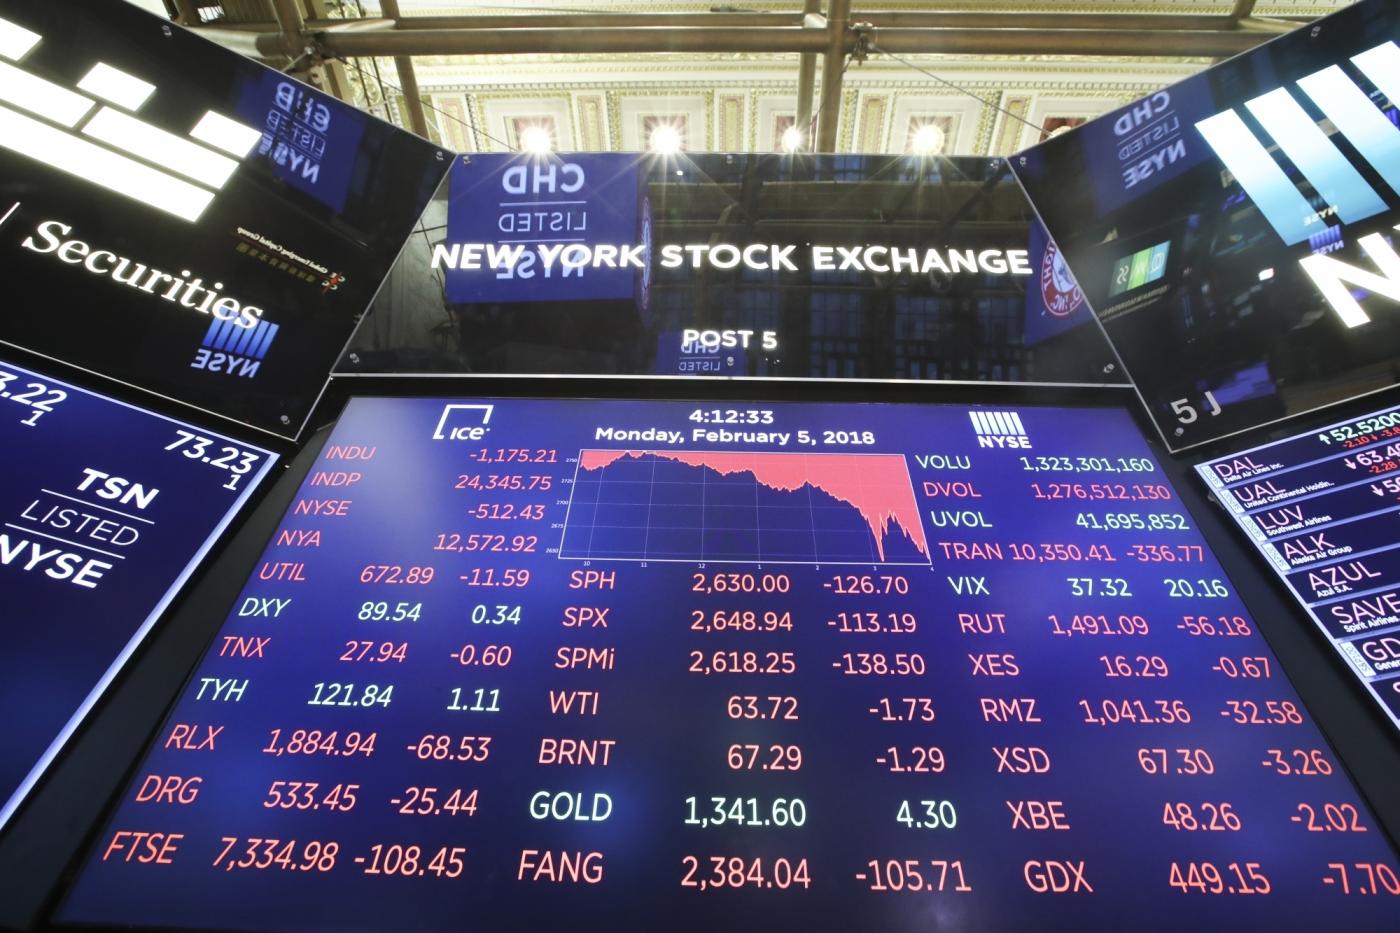 NEW YORK, Feb. 5, 2018 (Xinhua) -- An electronic screen displaying trading data is seen at the New York Stock Exchange in New York, the United States, on Feb. 5, 2018. U.S. stocks closed sharply lower on Monday, with the Dow plummeting 4.60 percent, as the market took a heavy hit from panic sales. (Xinhua/Wang Ying/IANS) by .